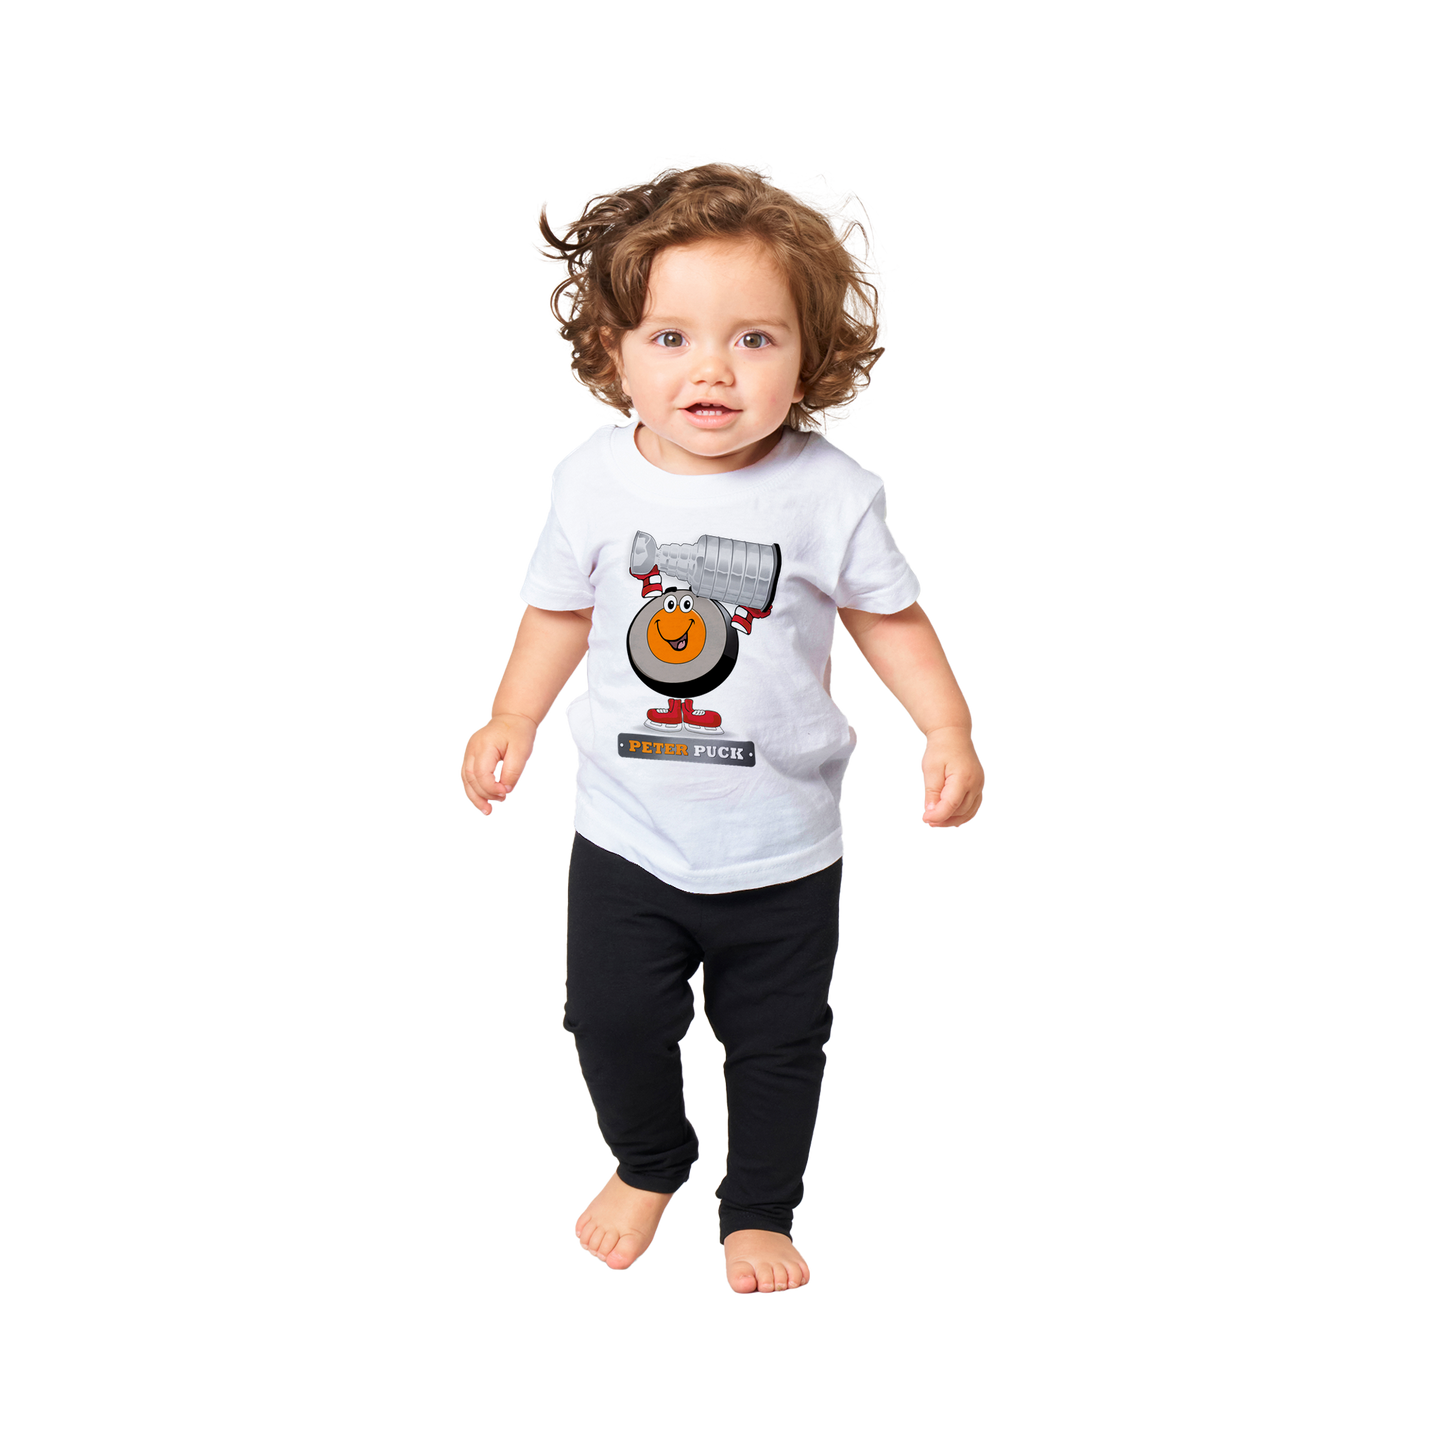 Peter Puck Stanley Cup Classic Baby Crewneck T-shirt